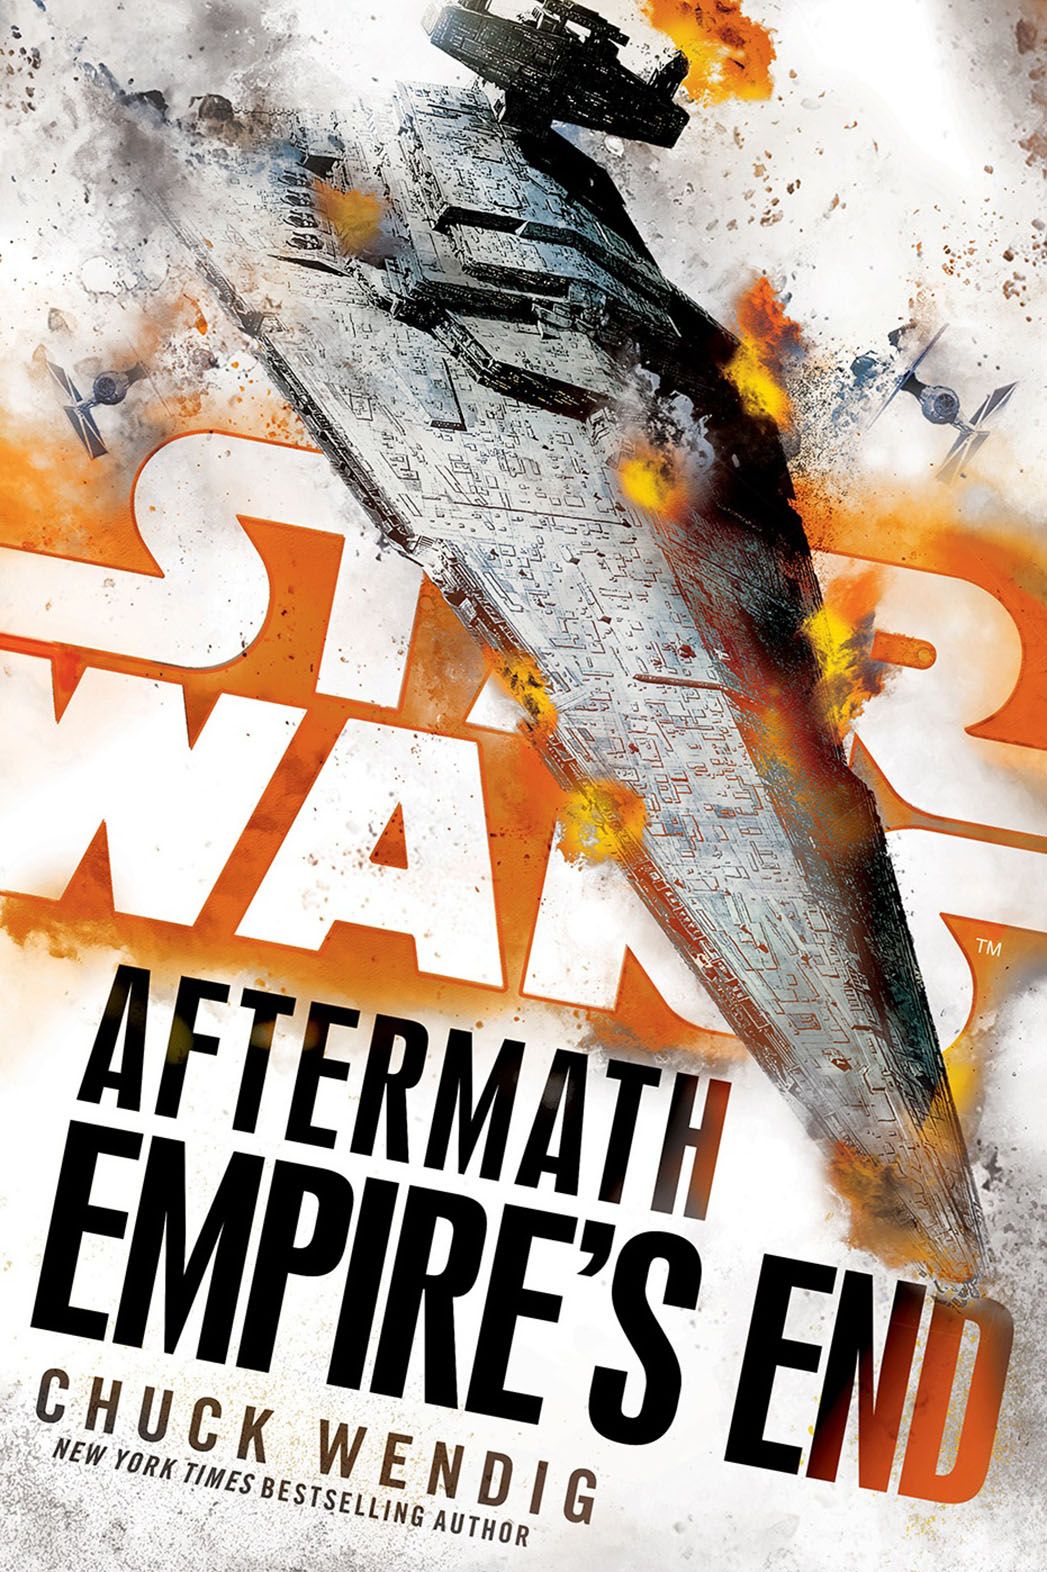 Star Wars: Aftermath - Empire's End book cover